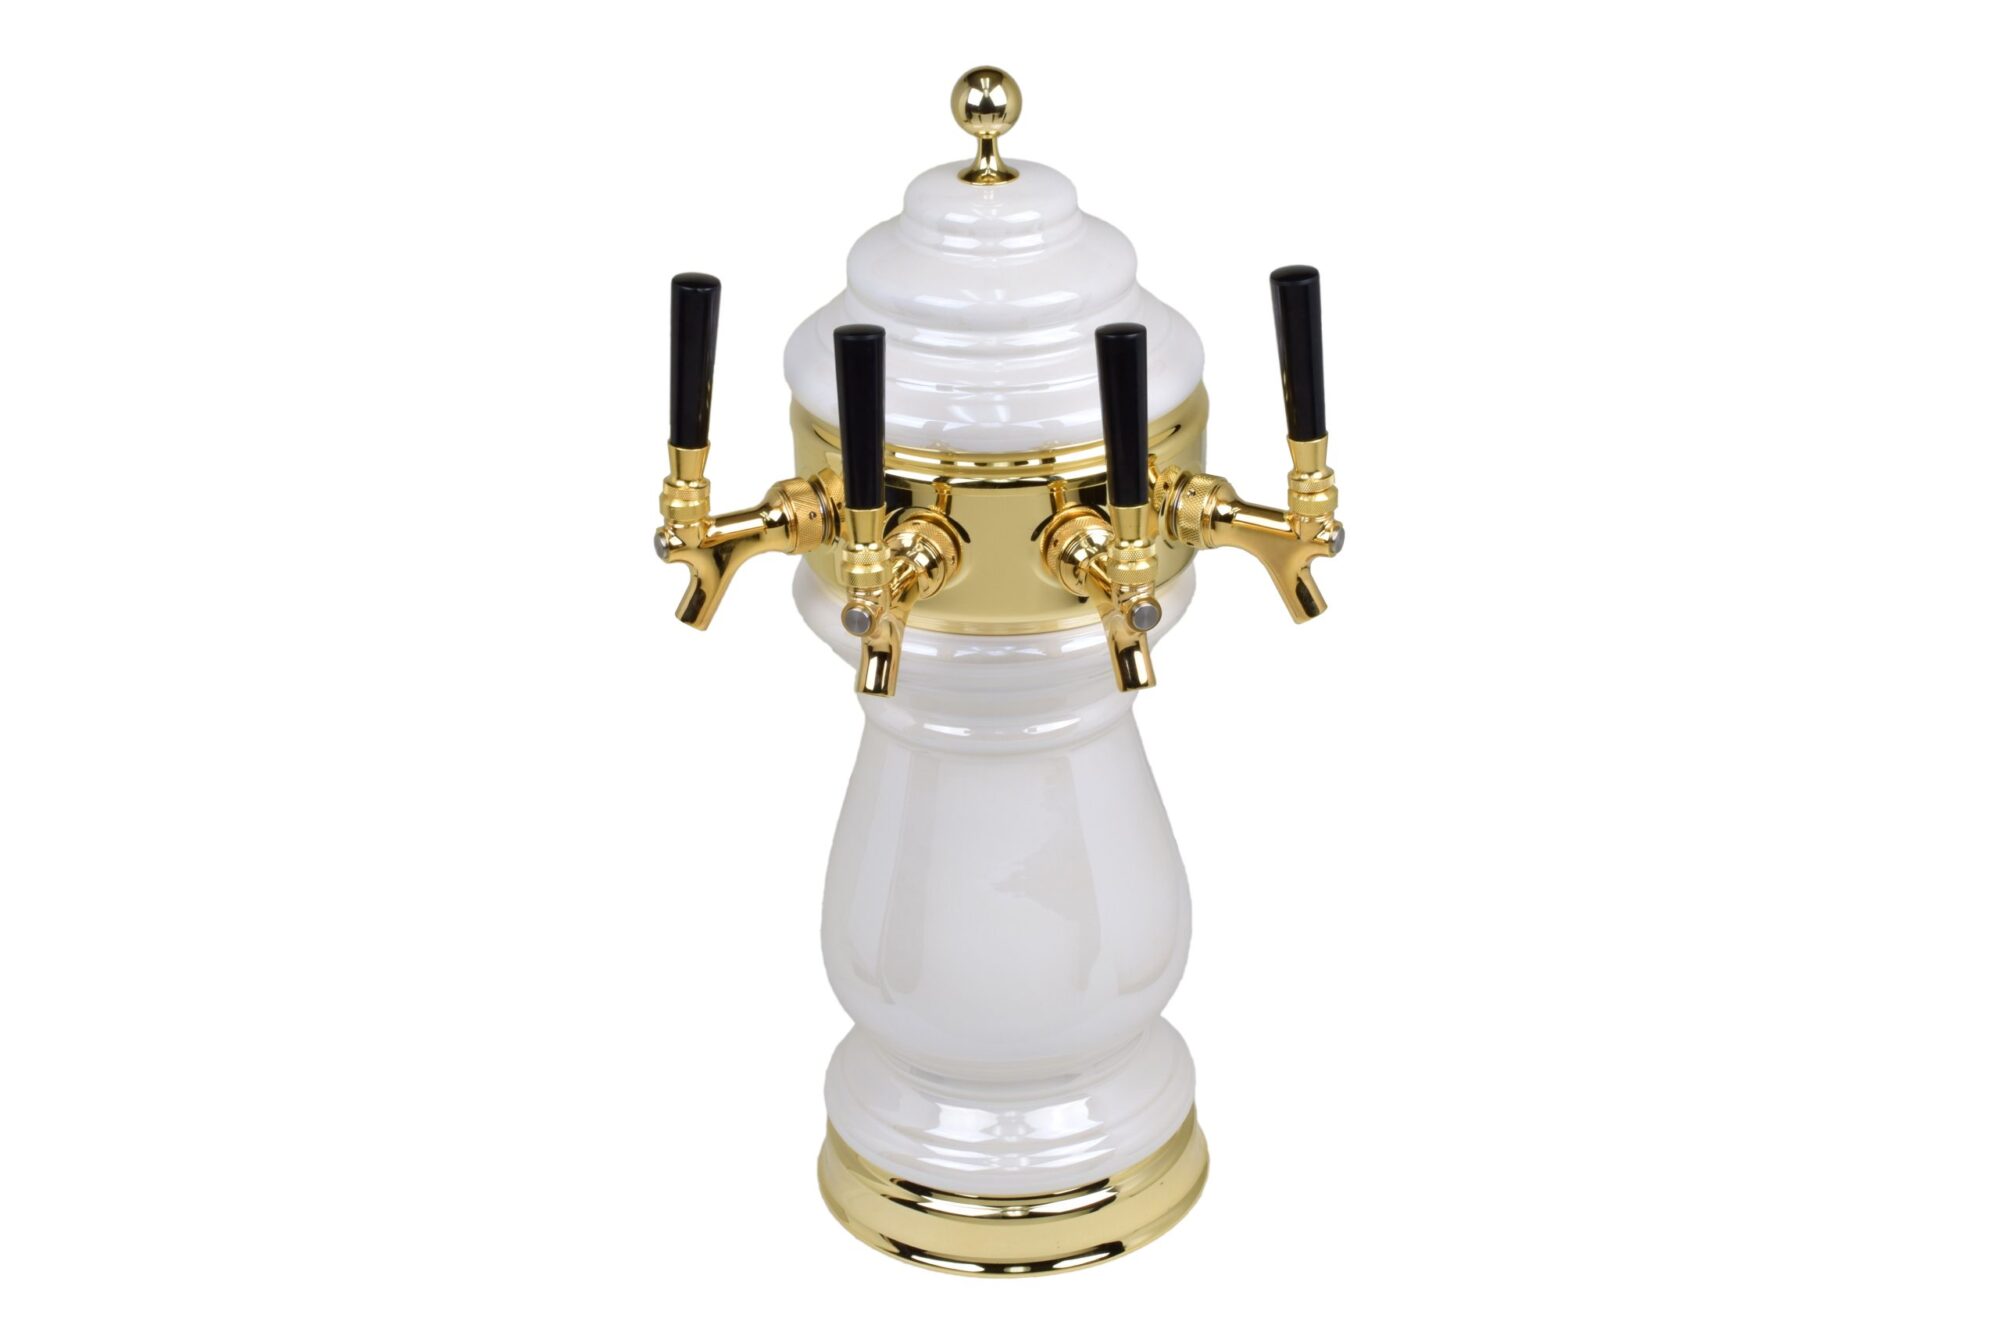 882B-4PW Four Faucet Ceramic Tower with PVD Brass Hardware - Available in 5 Colors - Shown in Pearl White